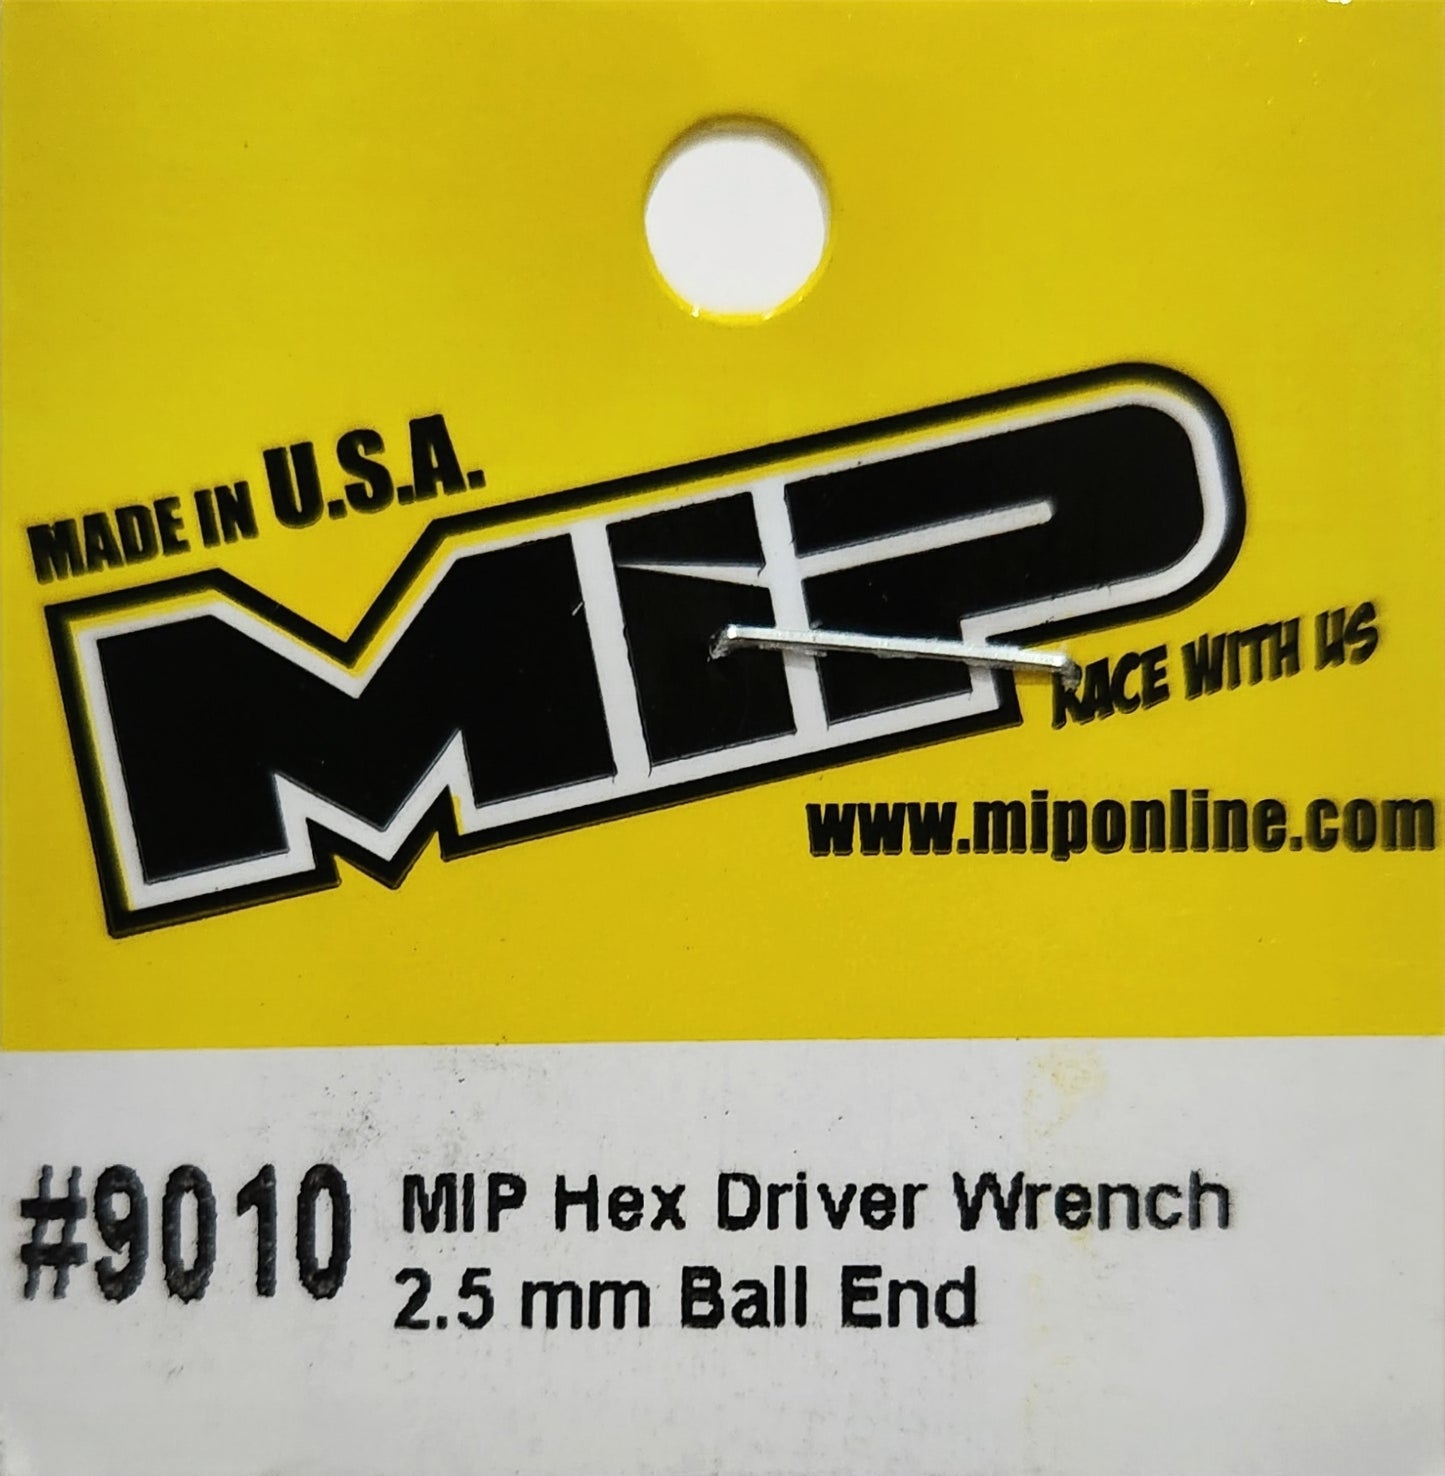 MIP Hex Driver Wrench 2.5mm Ball End